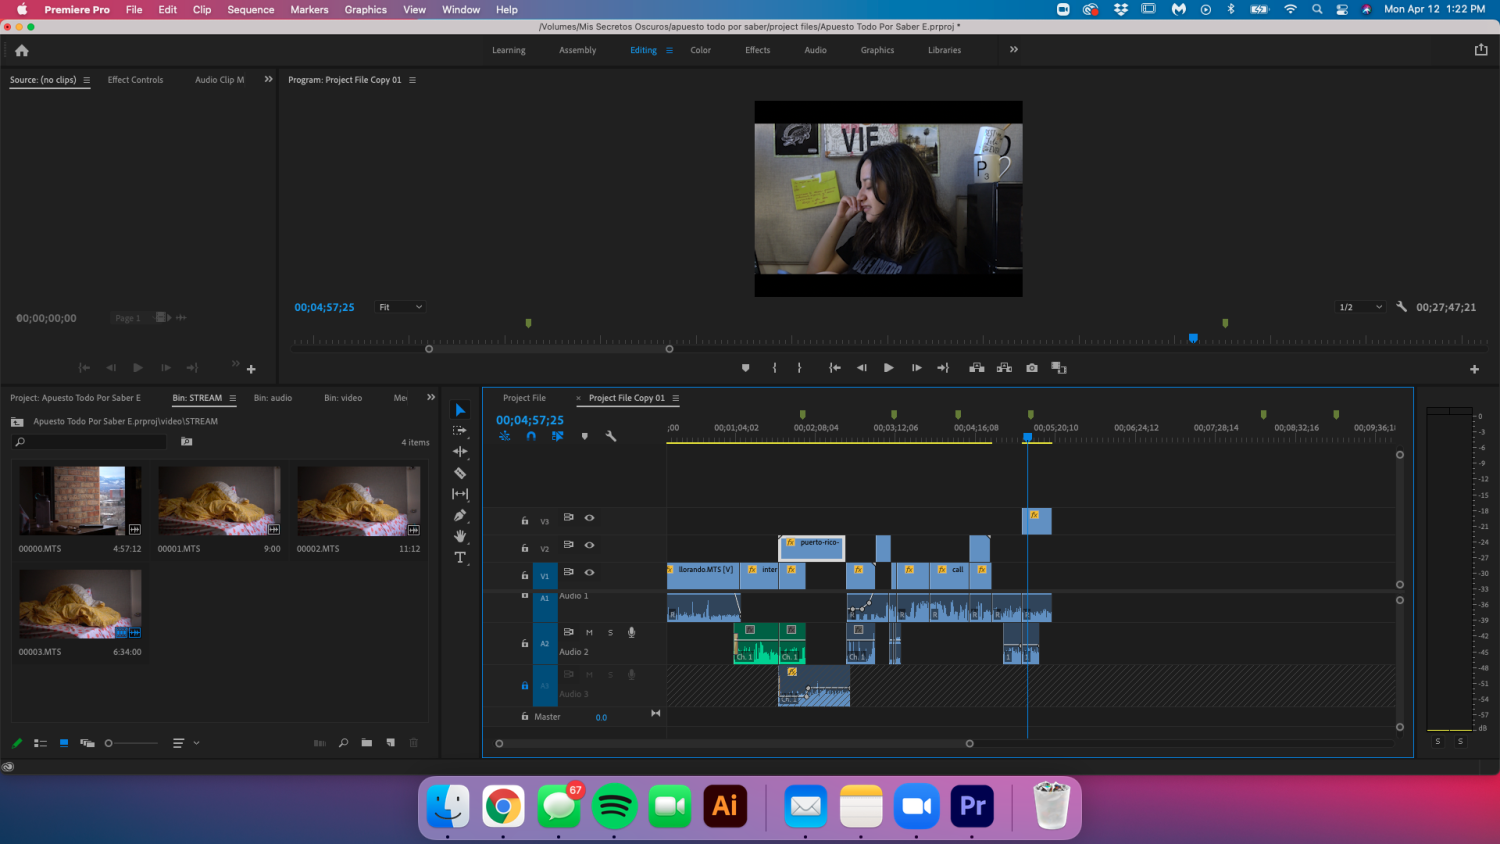 Interface of Adobe Premiere video editing